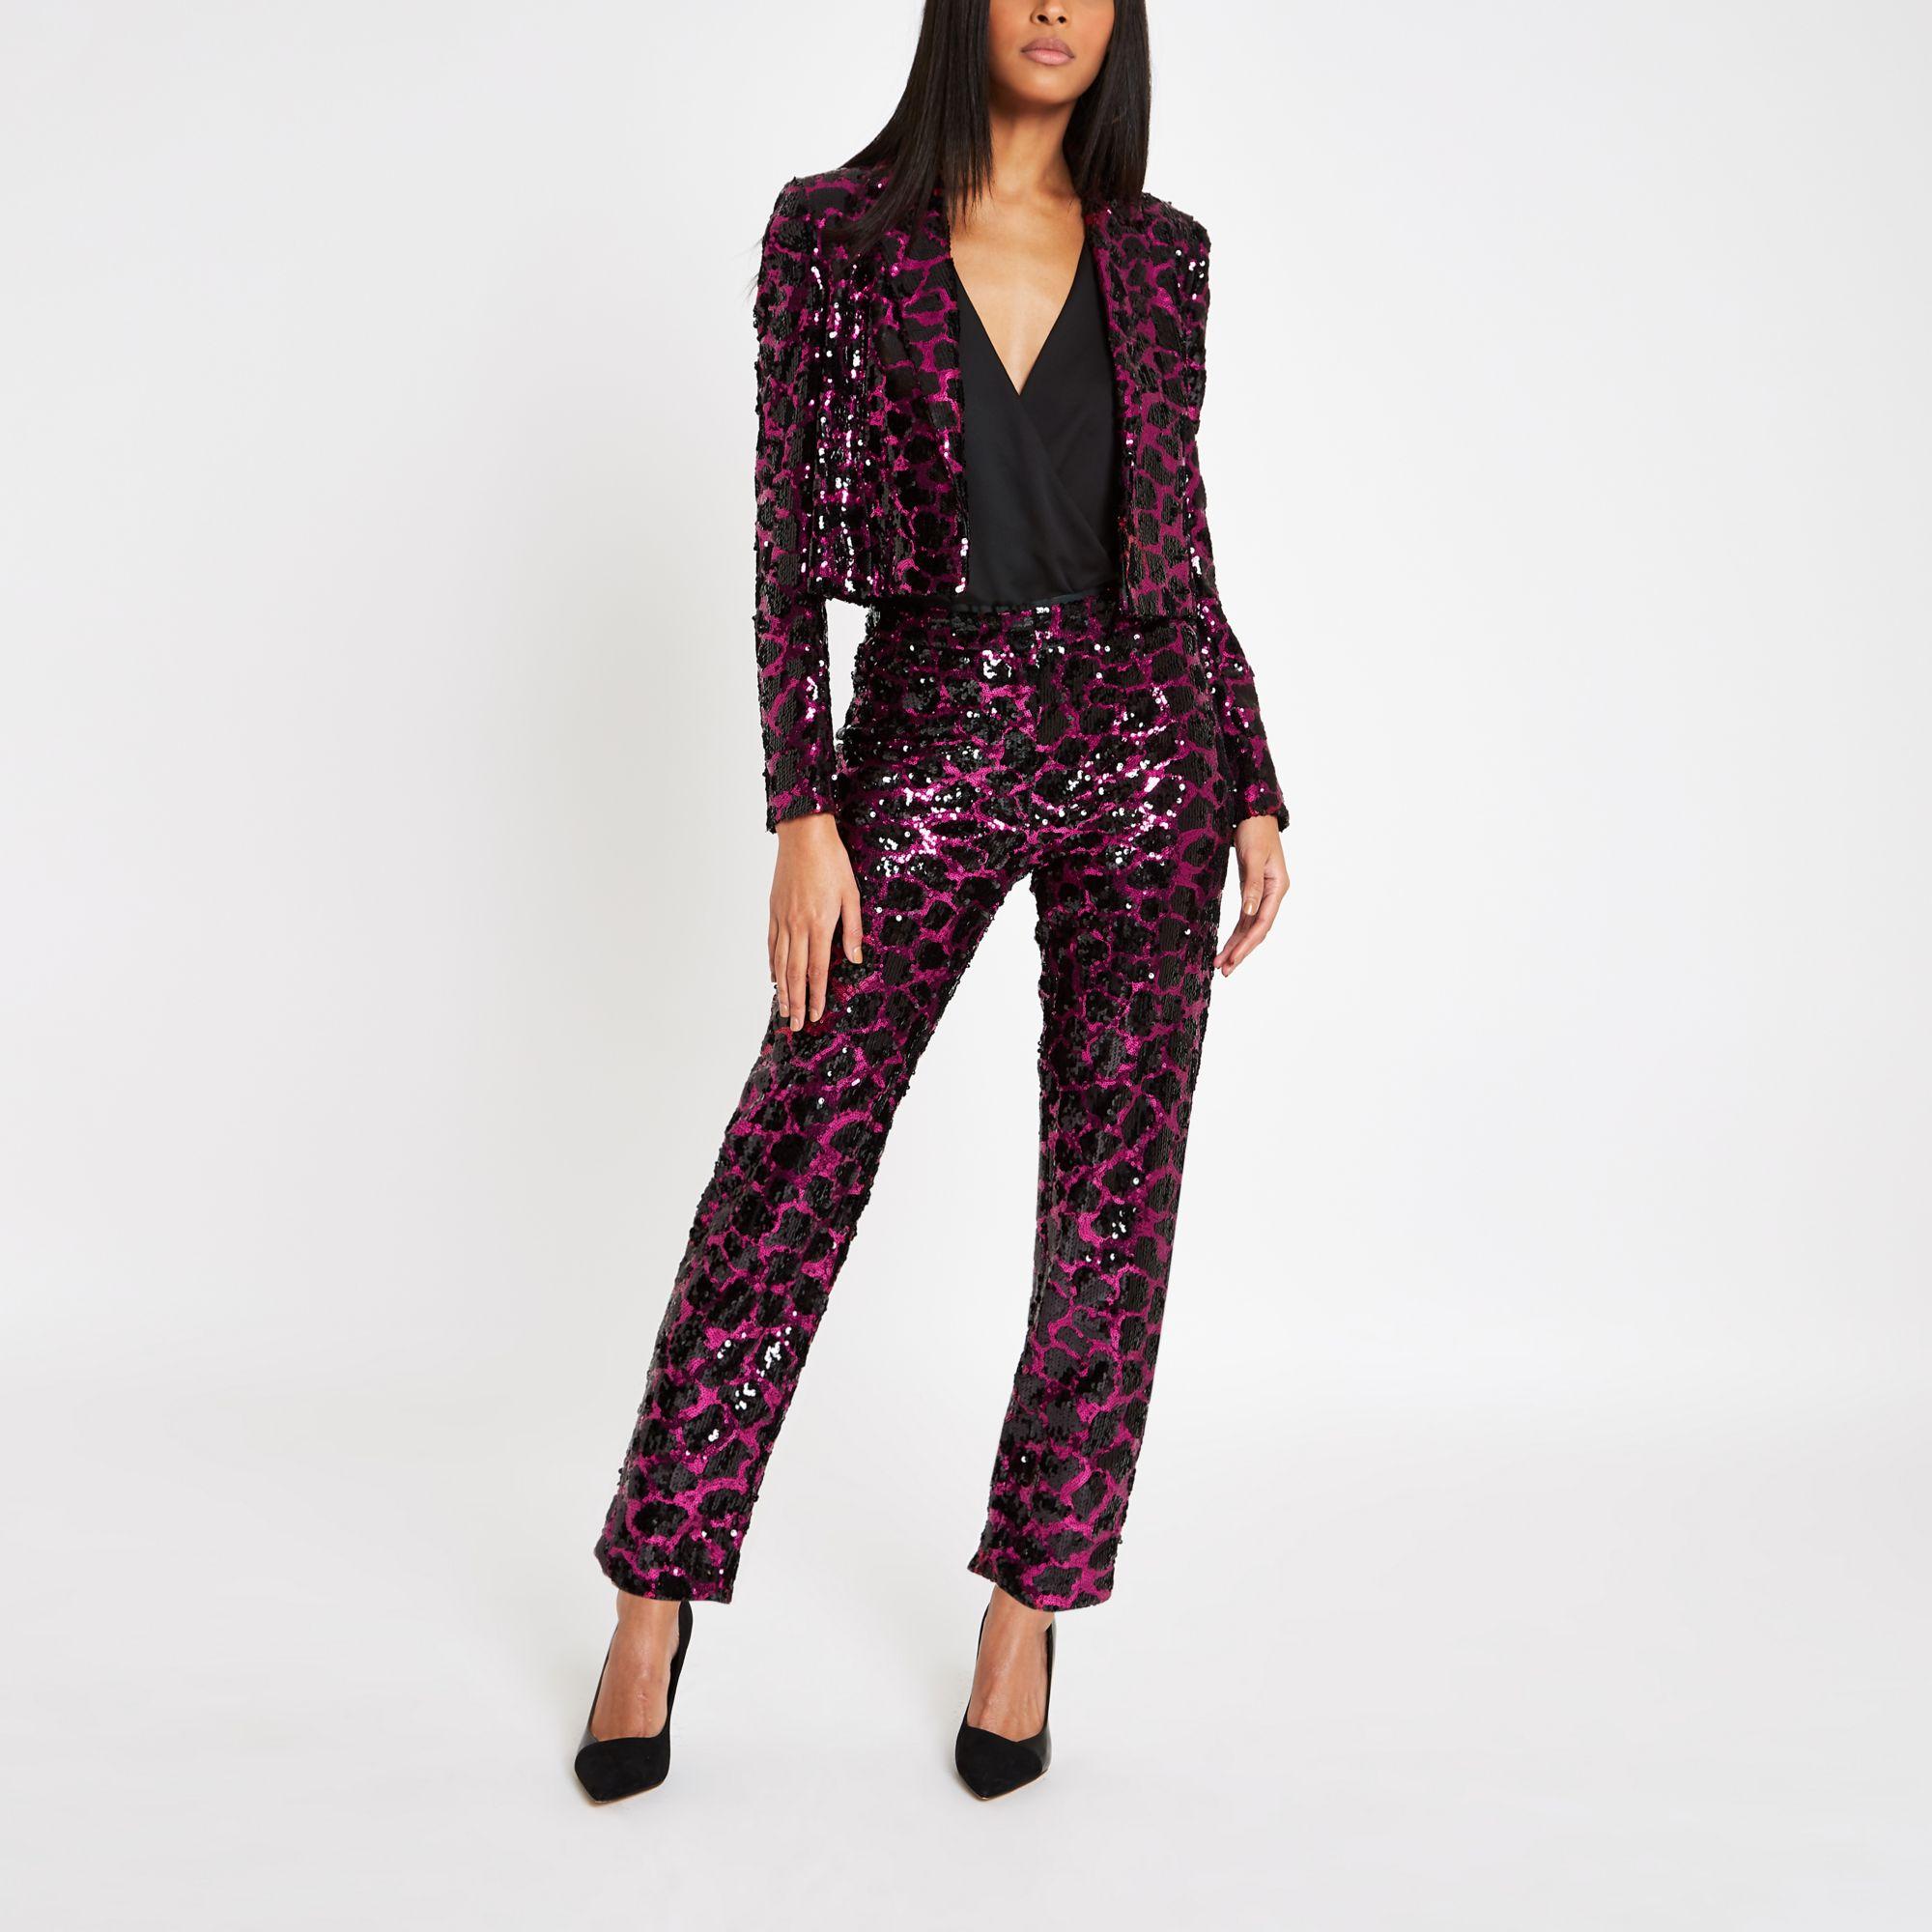 River Island Sequin Print Cigarette Trousers in Pink - Lyst